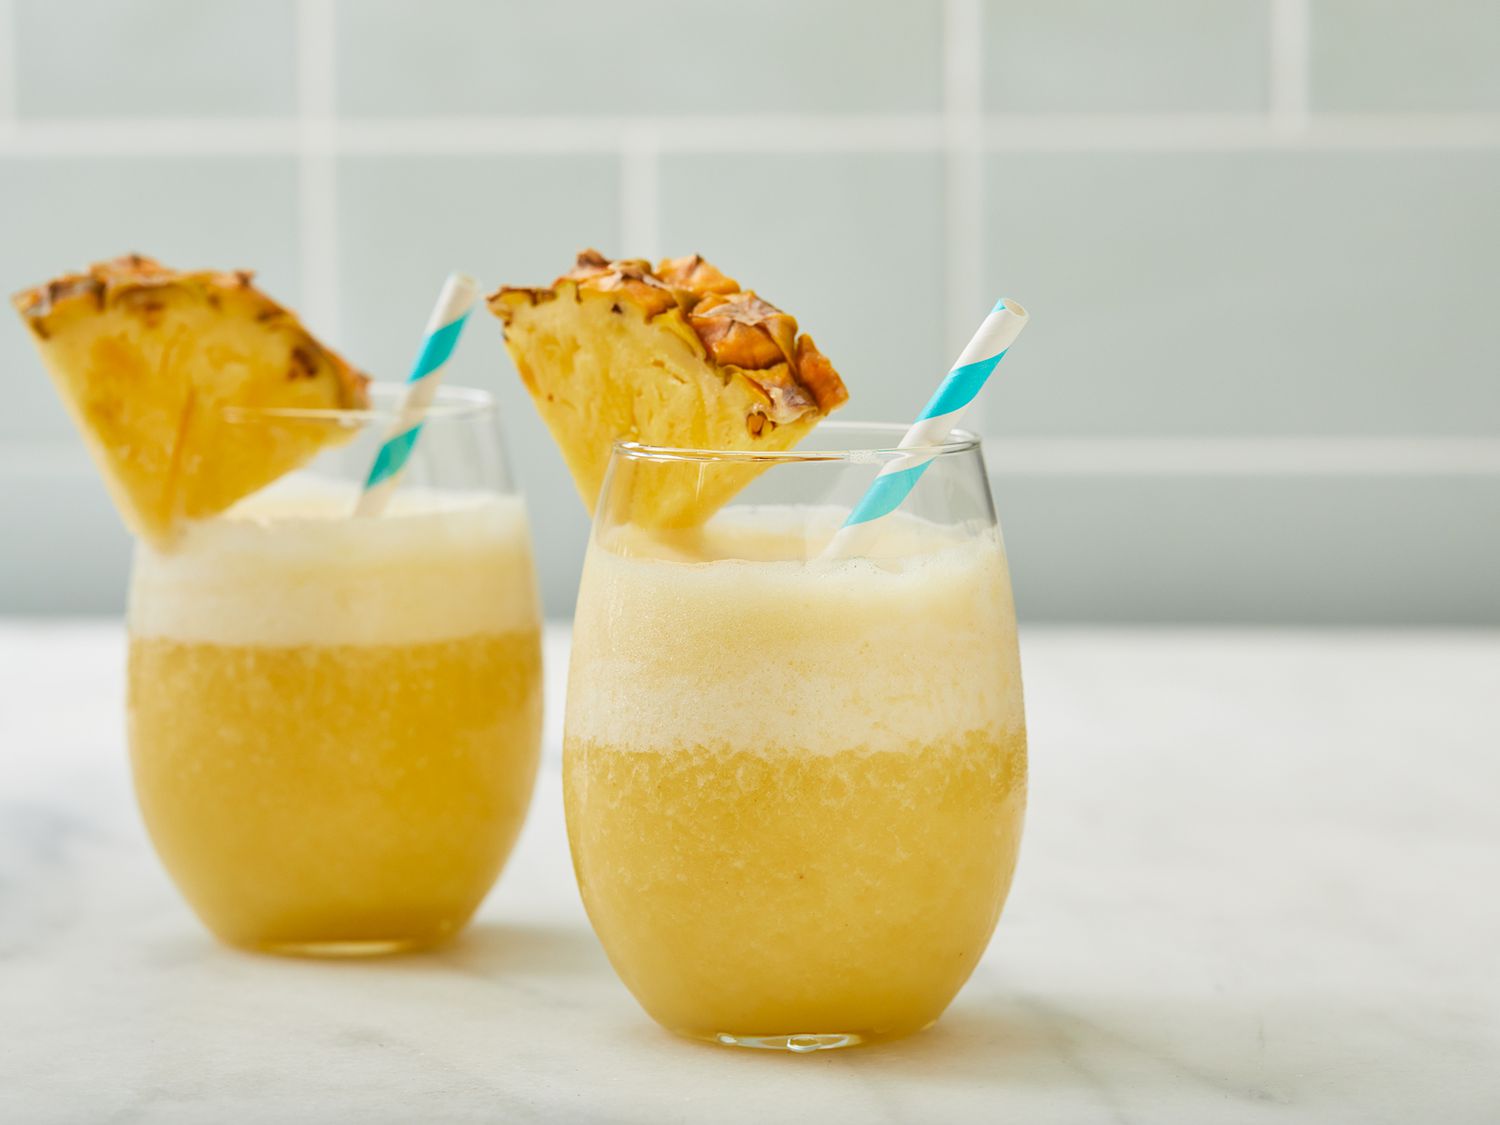 Side angle closeup of two glasses with pineapple-banana smoothie garnished with pineapple slices